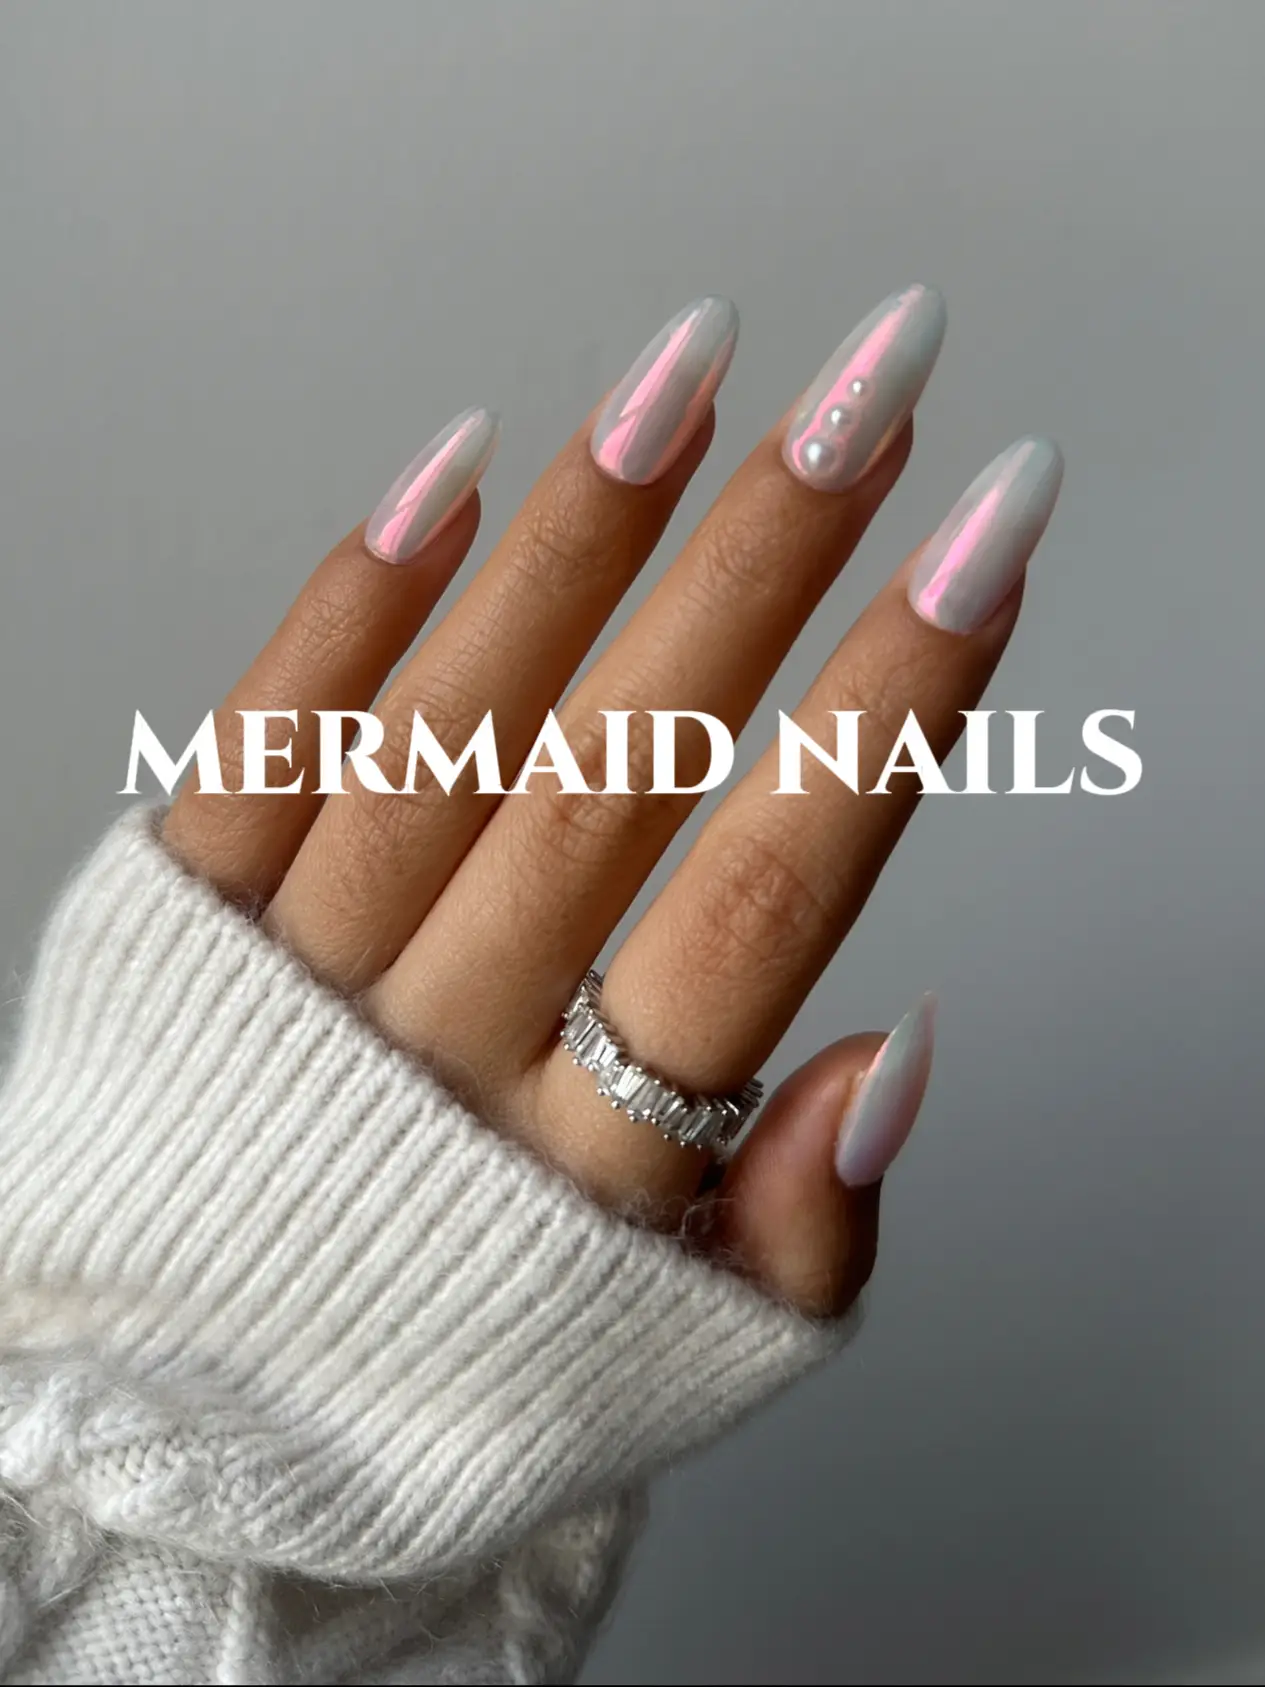 nail the mermaidcore aesthetic with these pearl nail ideas by essie